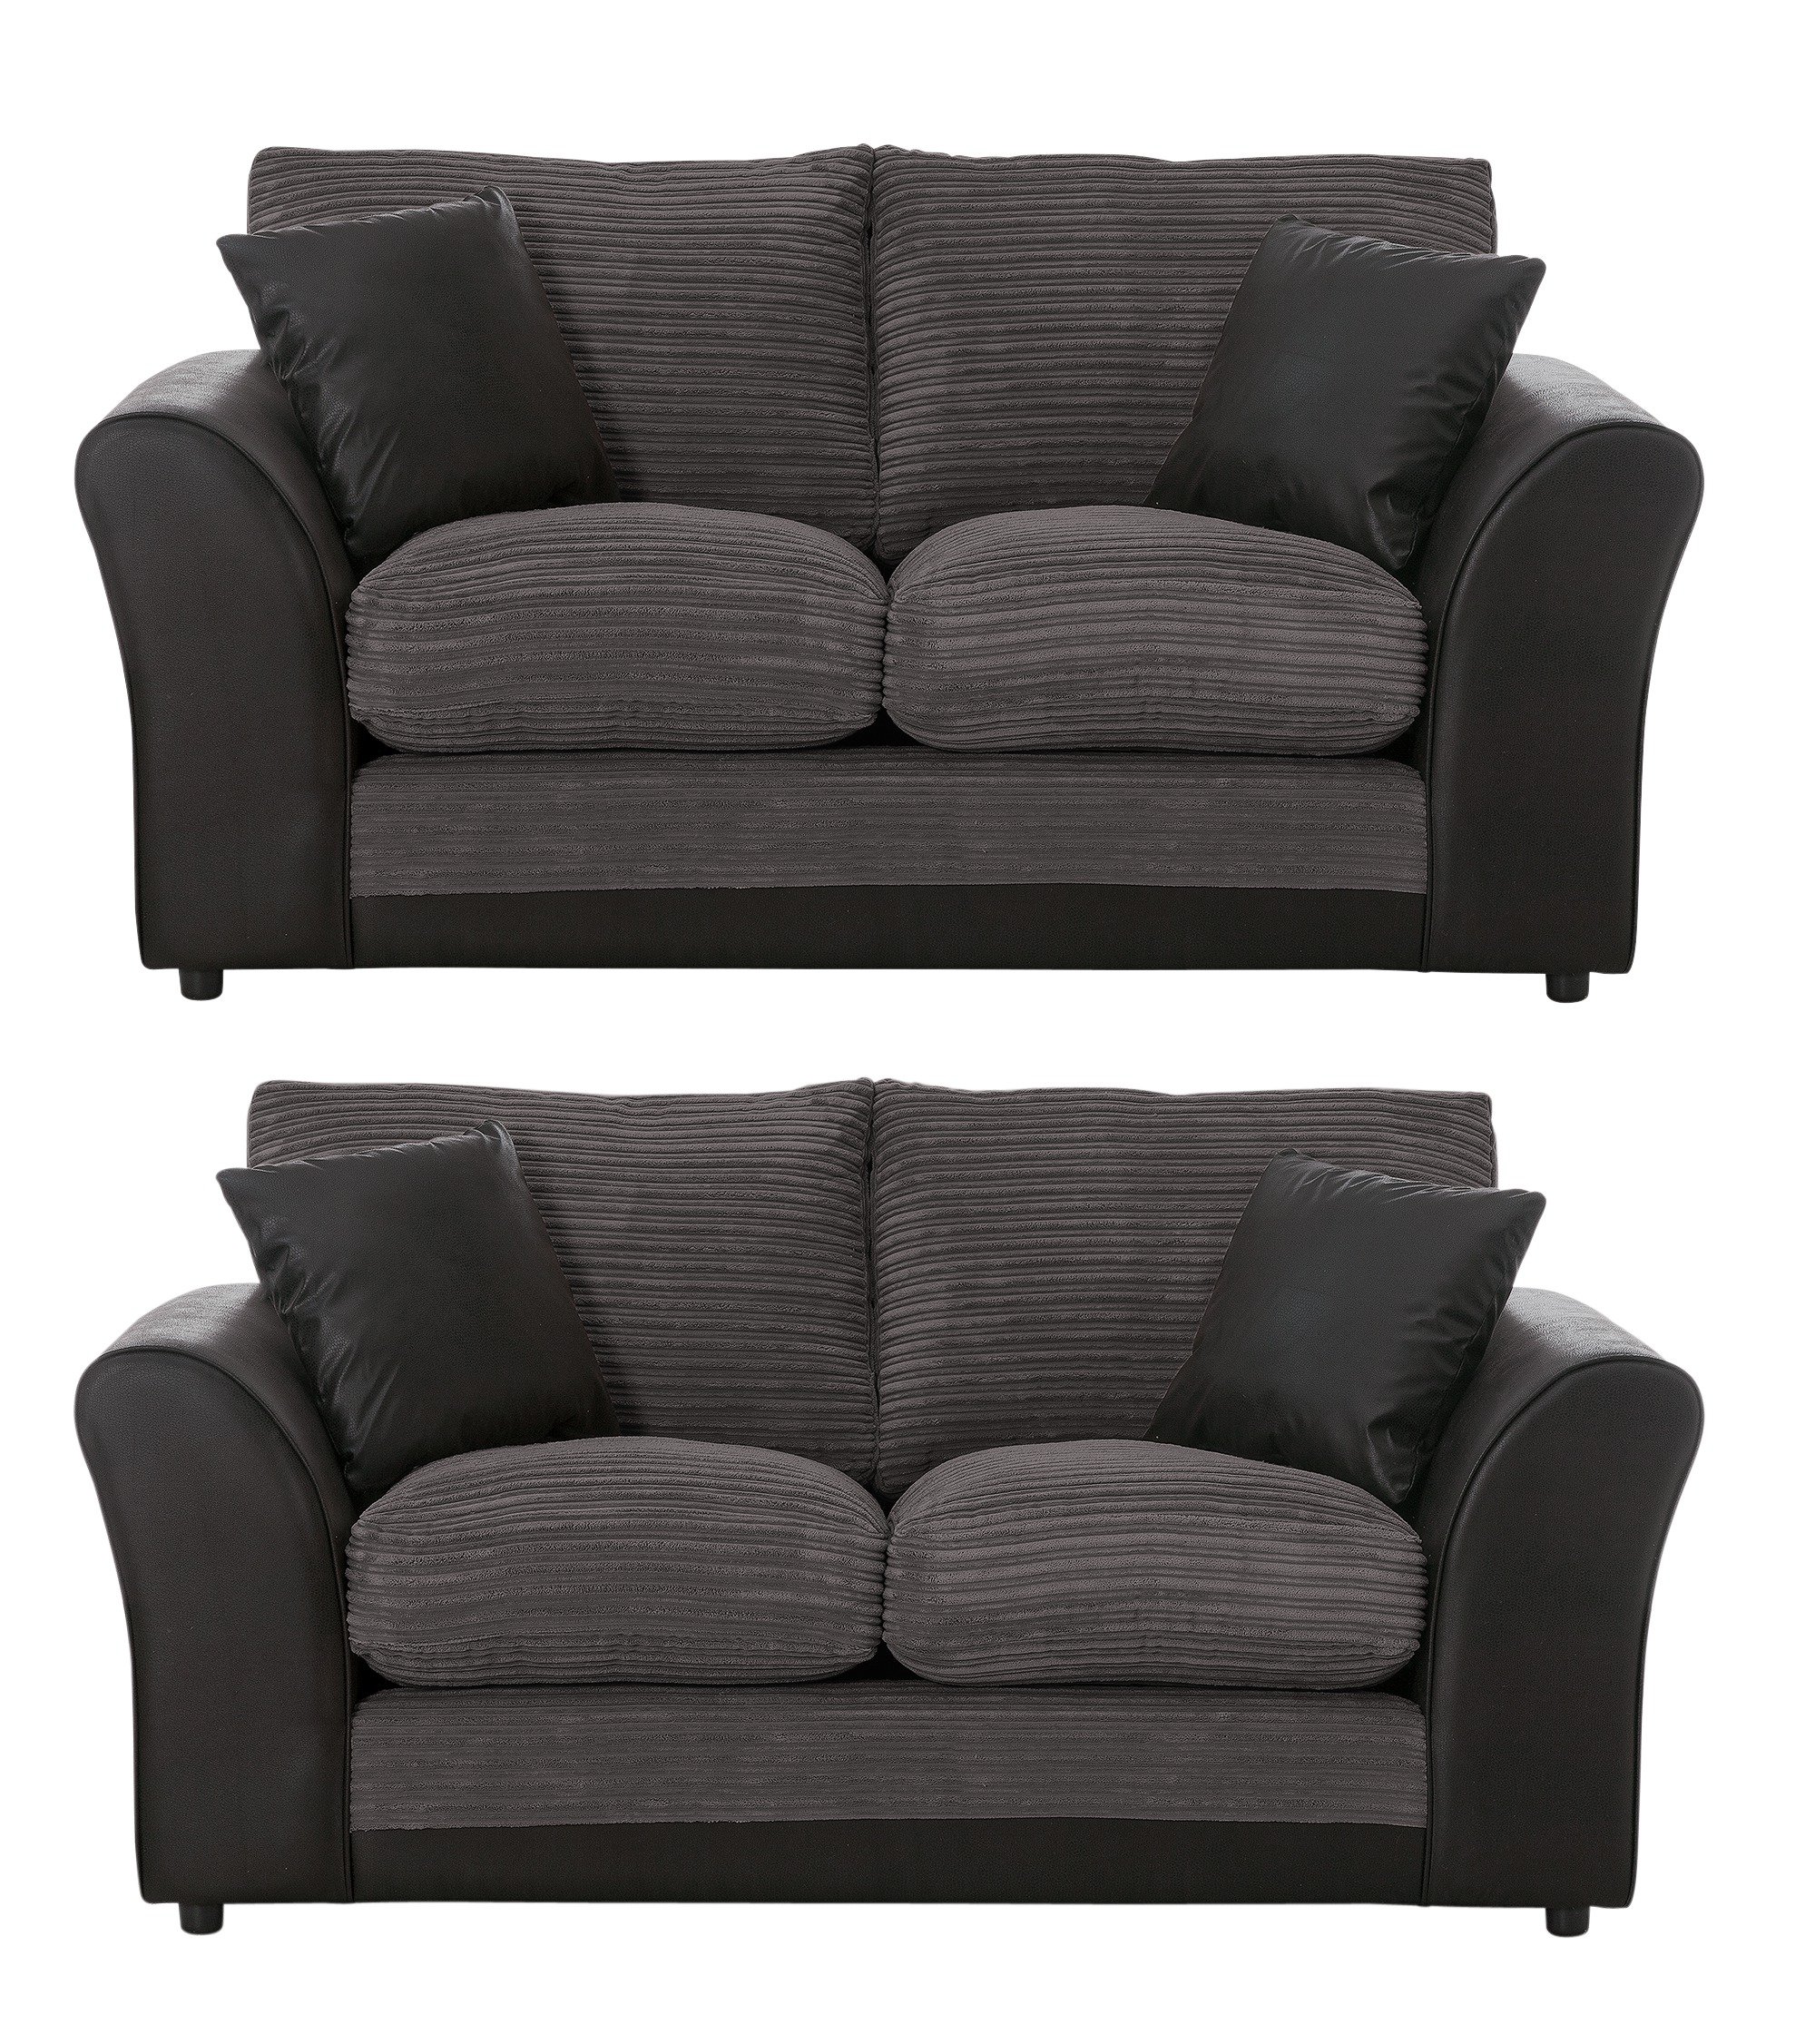 Argos Home Harley Fabric Pair of 2 Seater Sofas - Charcoal